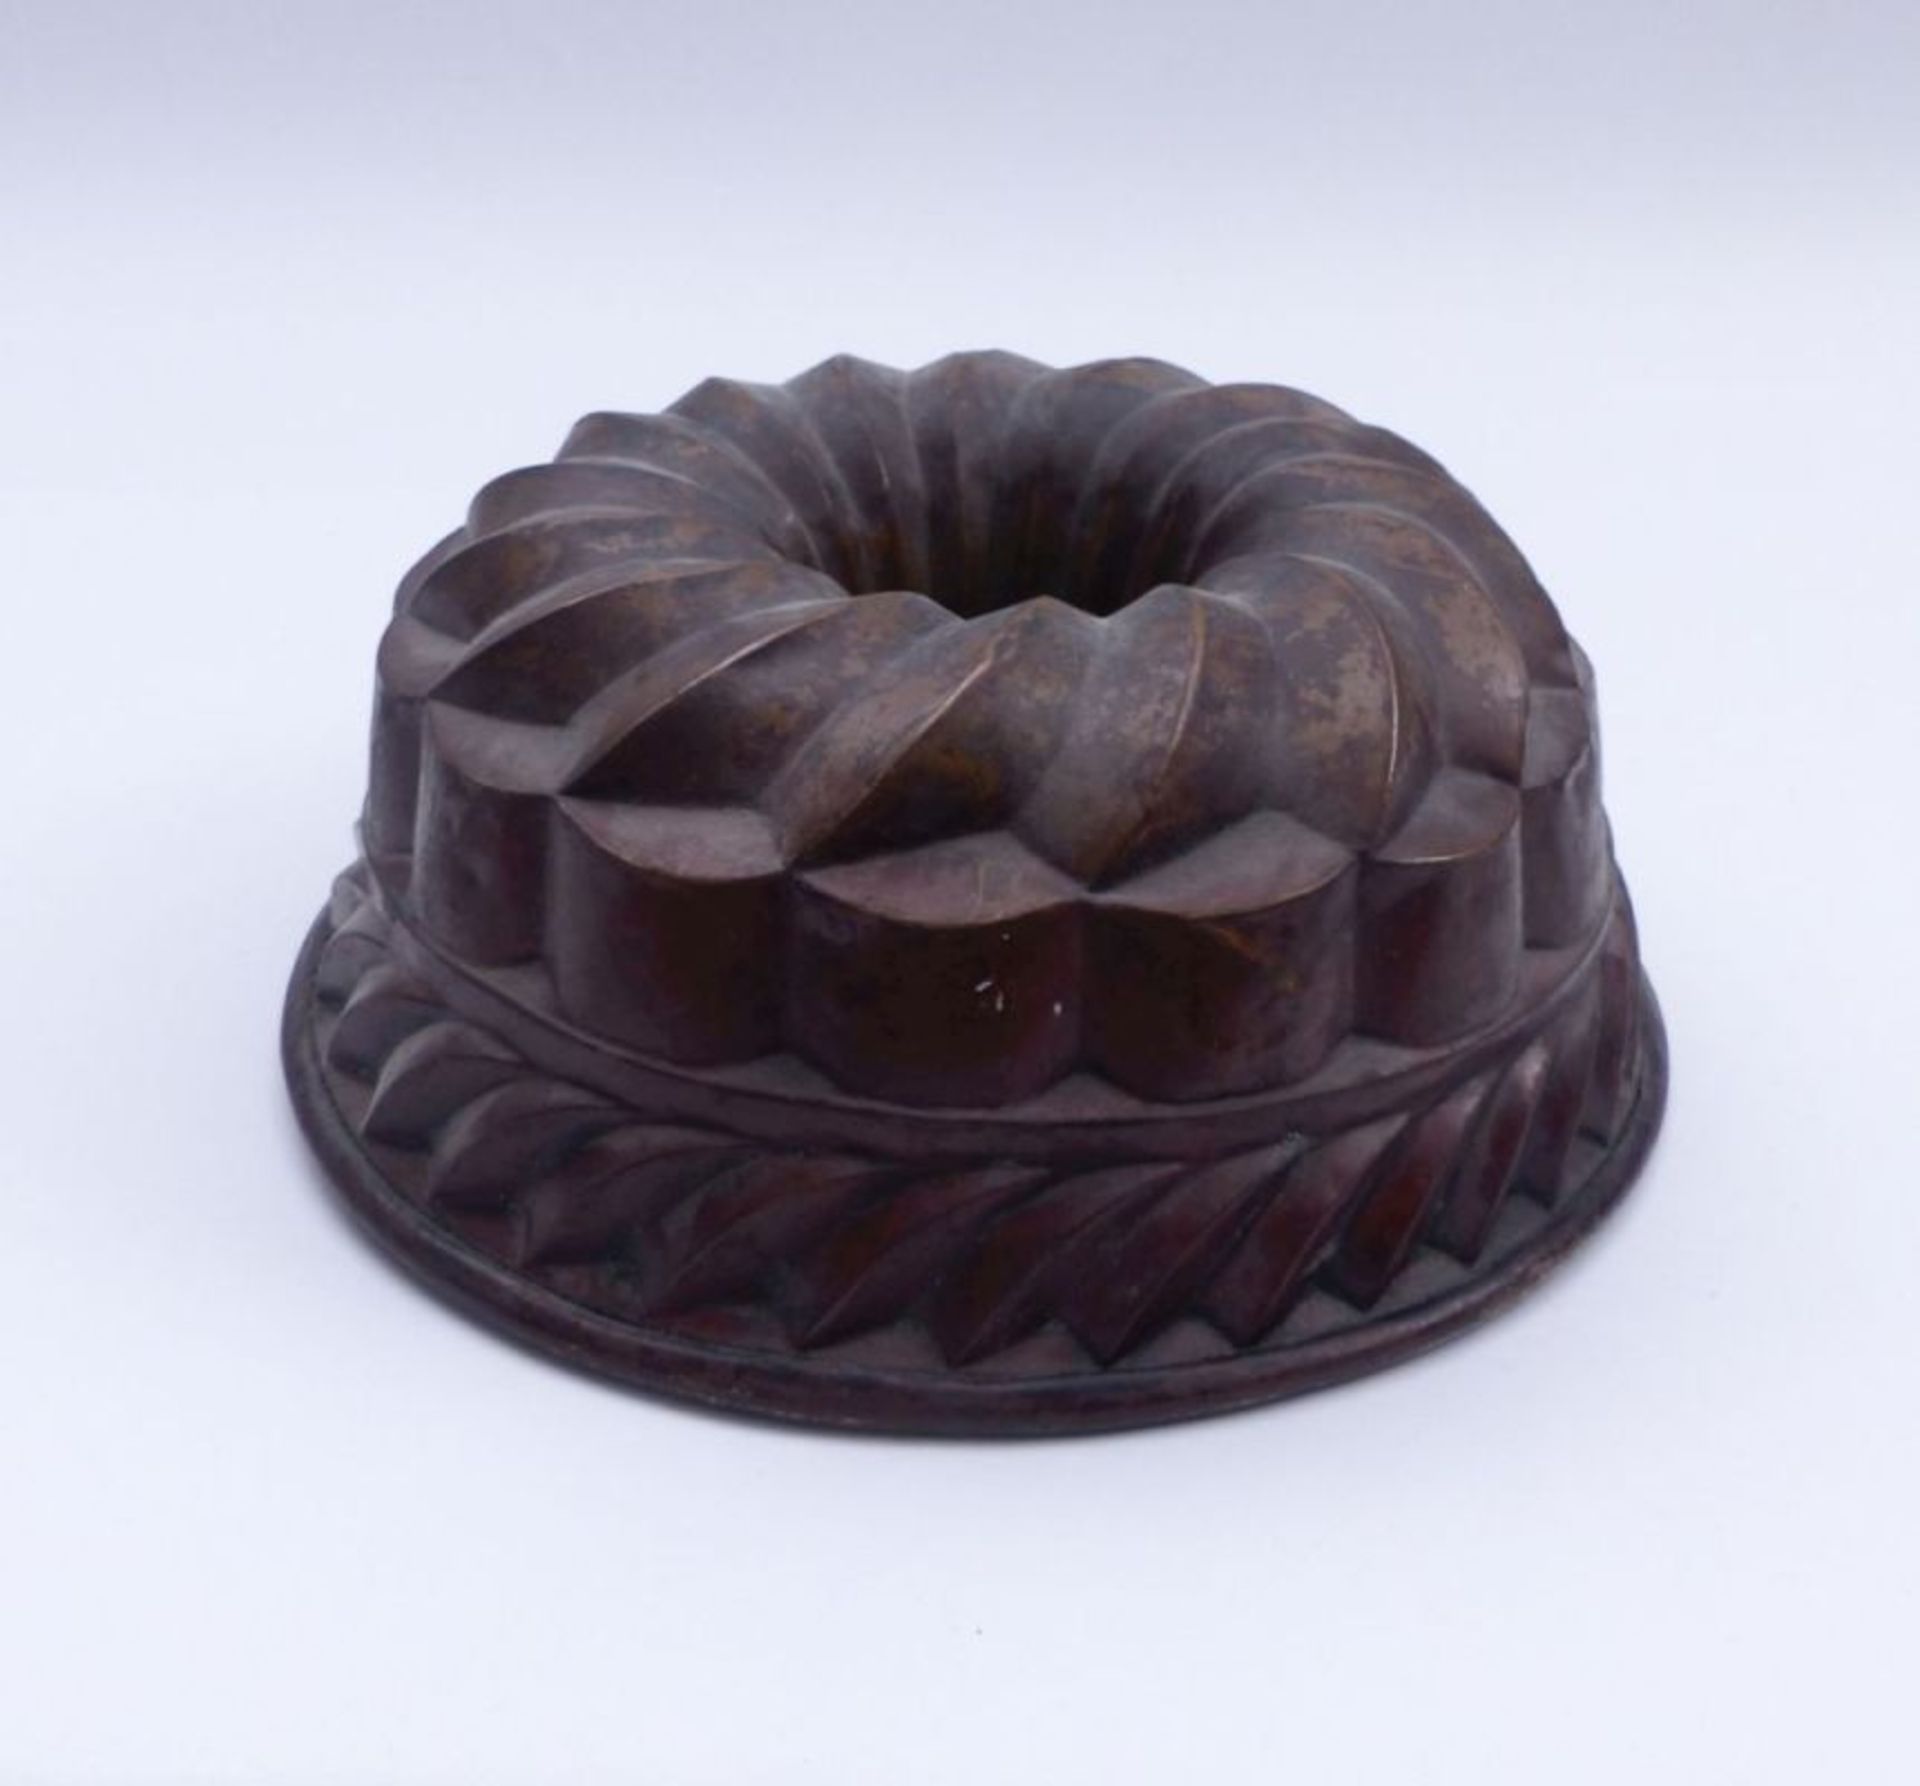 Baking mould19th centuryRound, multi-zone form with openwork inner tube, flanged rim. Copper with